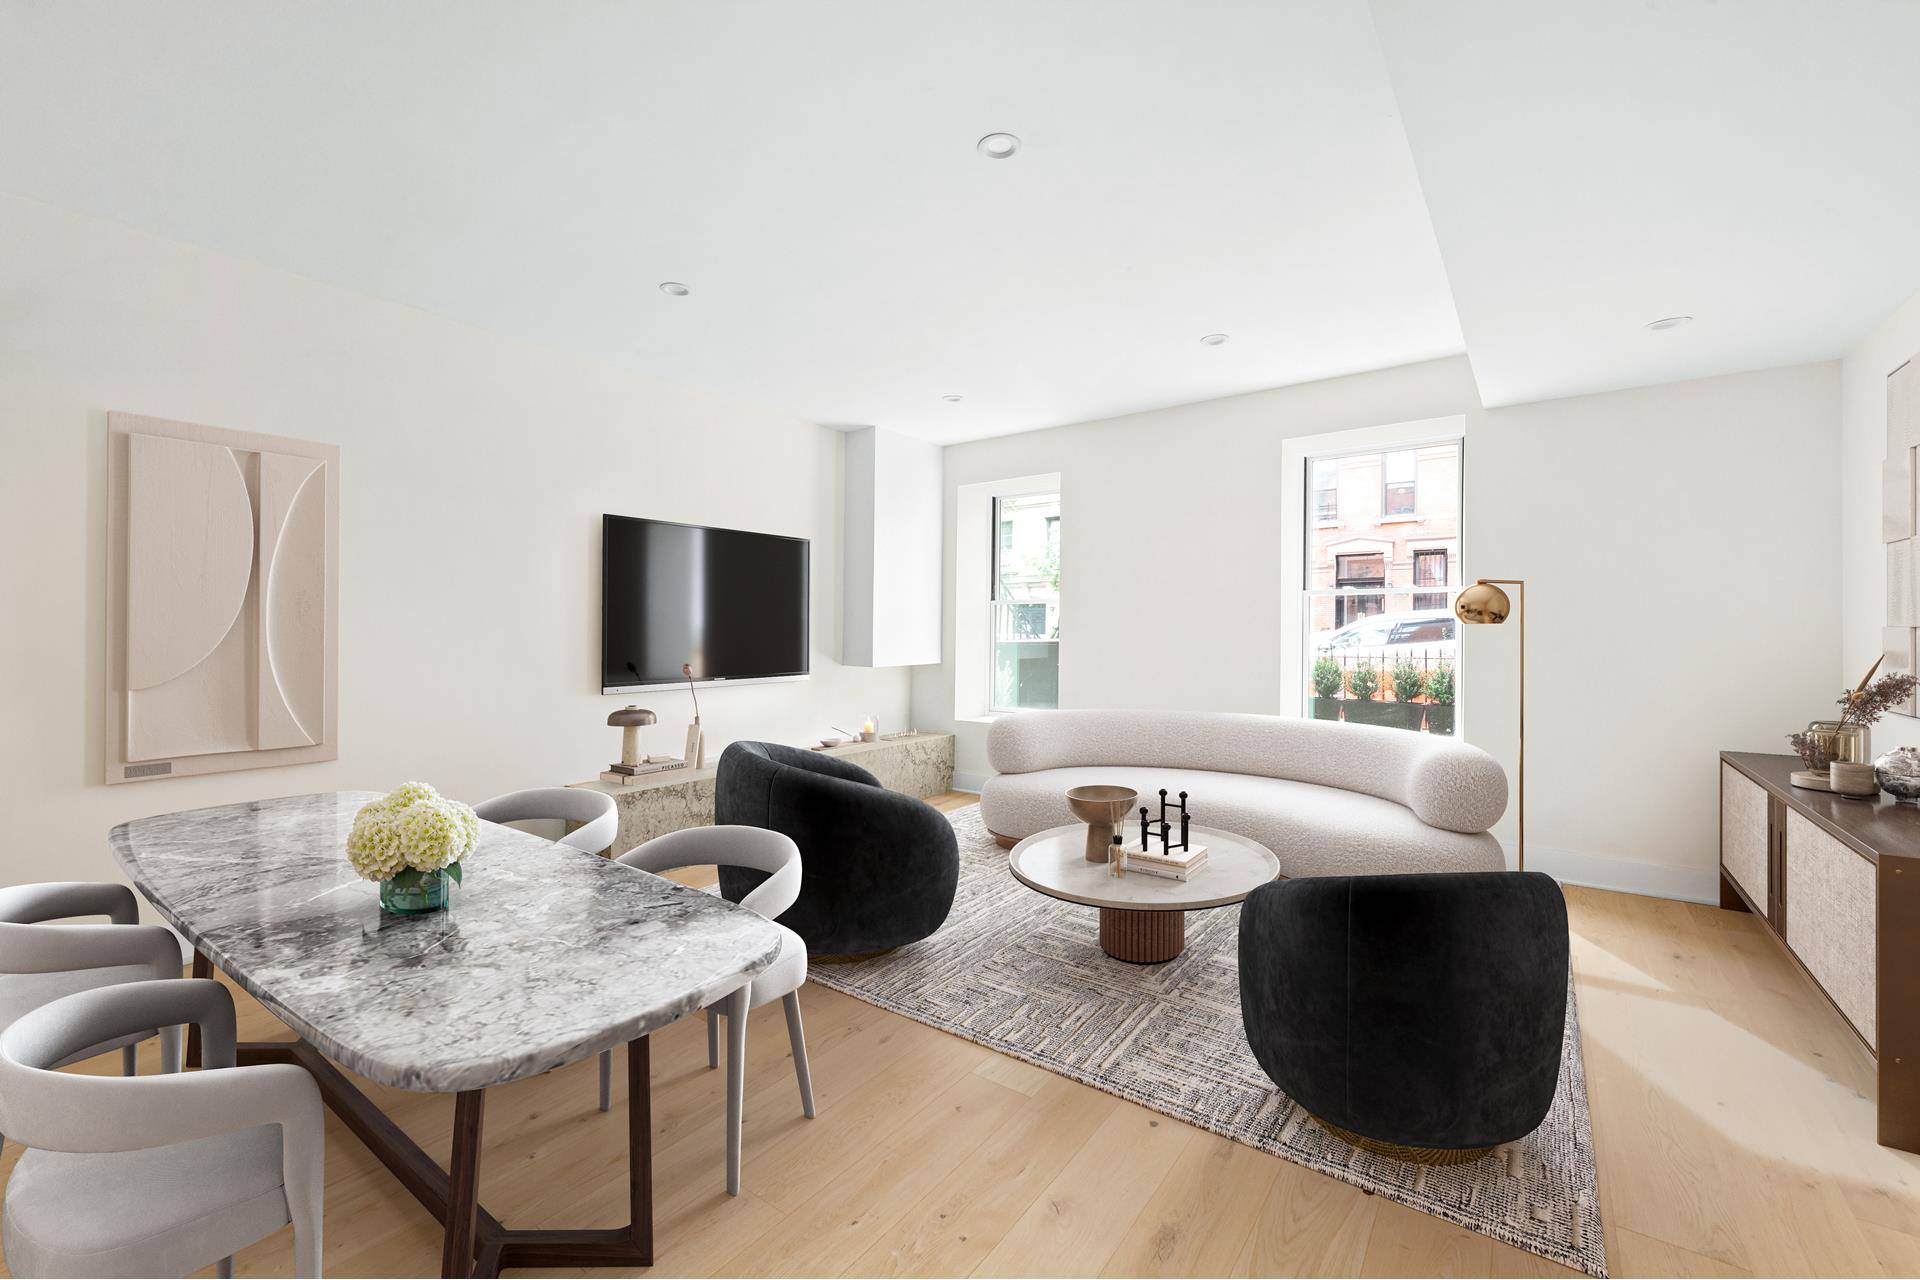 Nestled on one of the most convenient, centrally located blocks in Cobble Hill, 41 Wyckoff Street is a historic brick building that has been impeccably reimagined as four new condominium ...